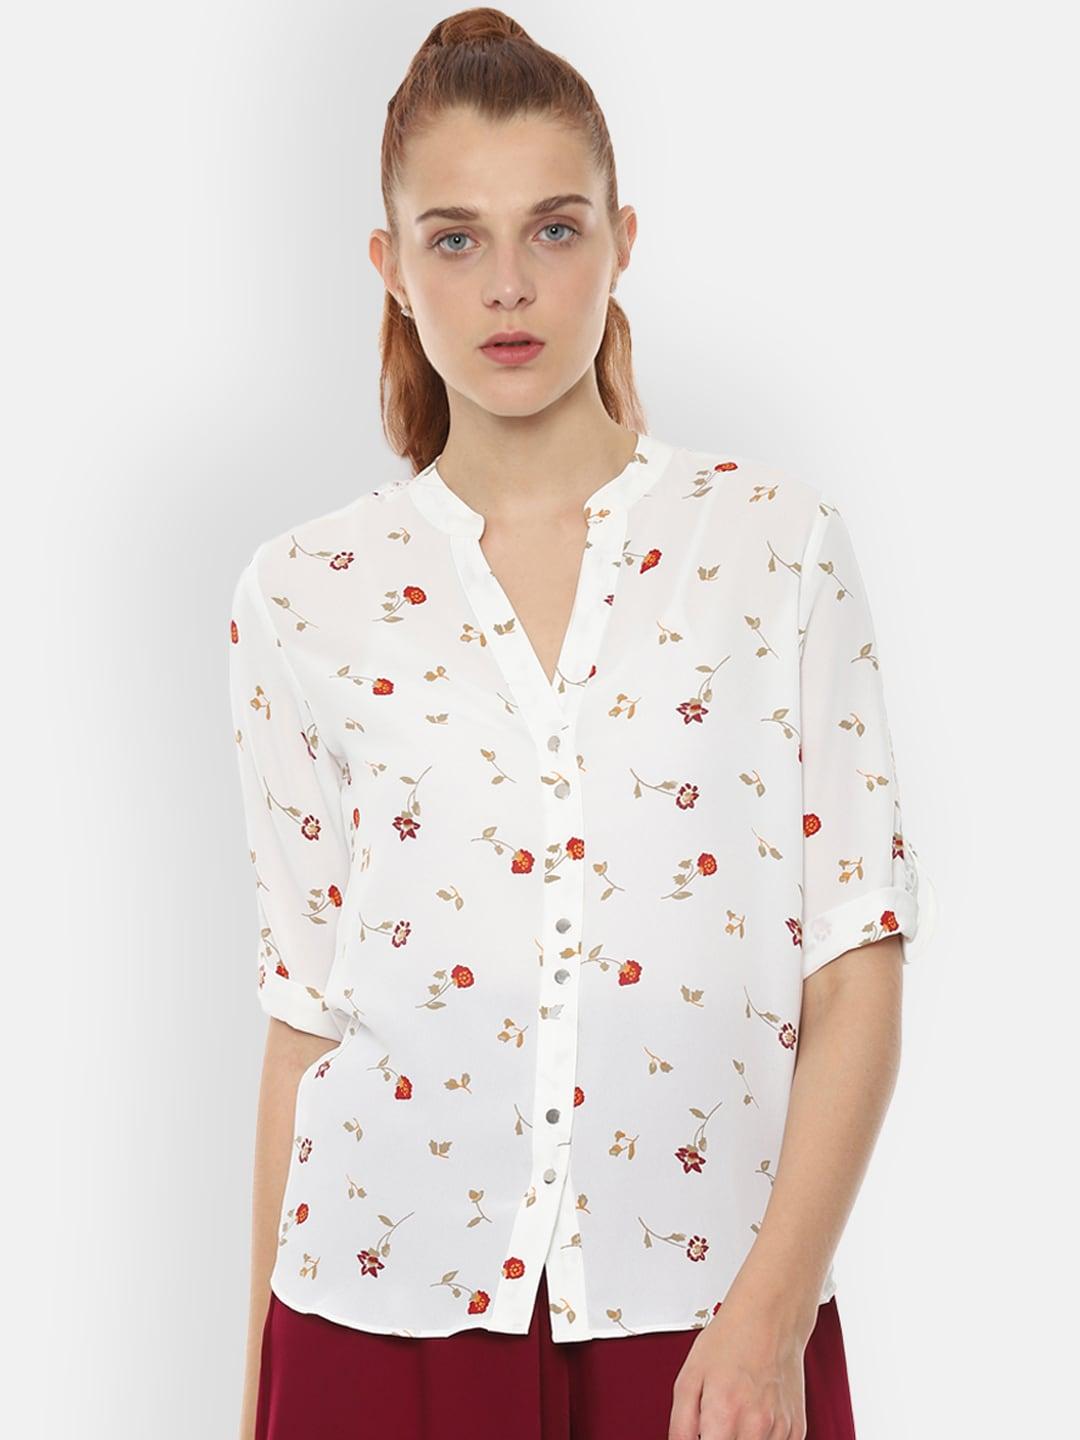 Allen Solly Woman White Regular Fit Printed Casual Shirt